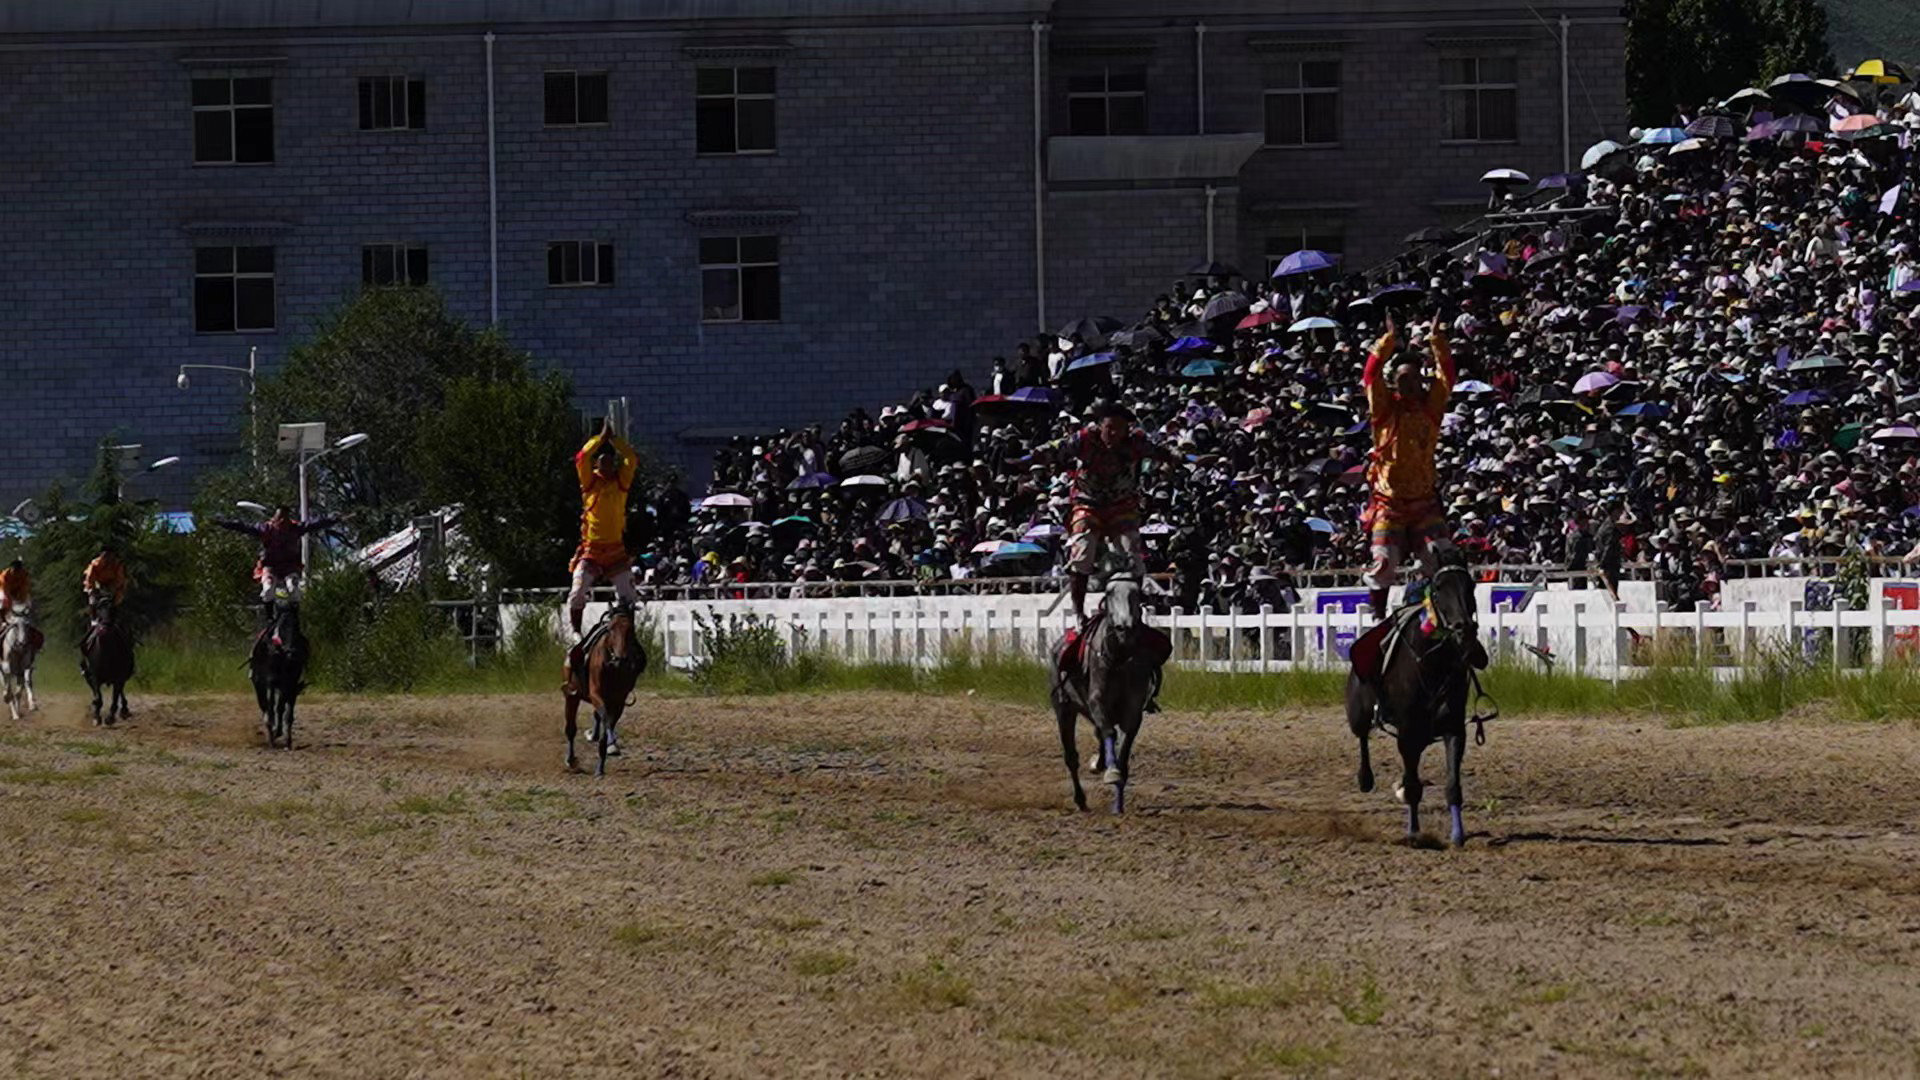 Live: Traditional horse racing during Shoton Festival in Lhasa